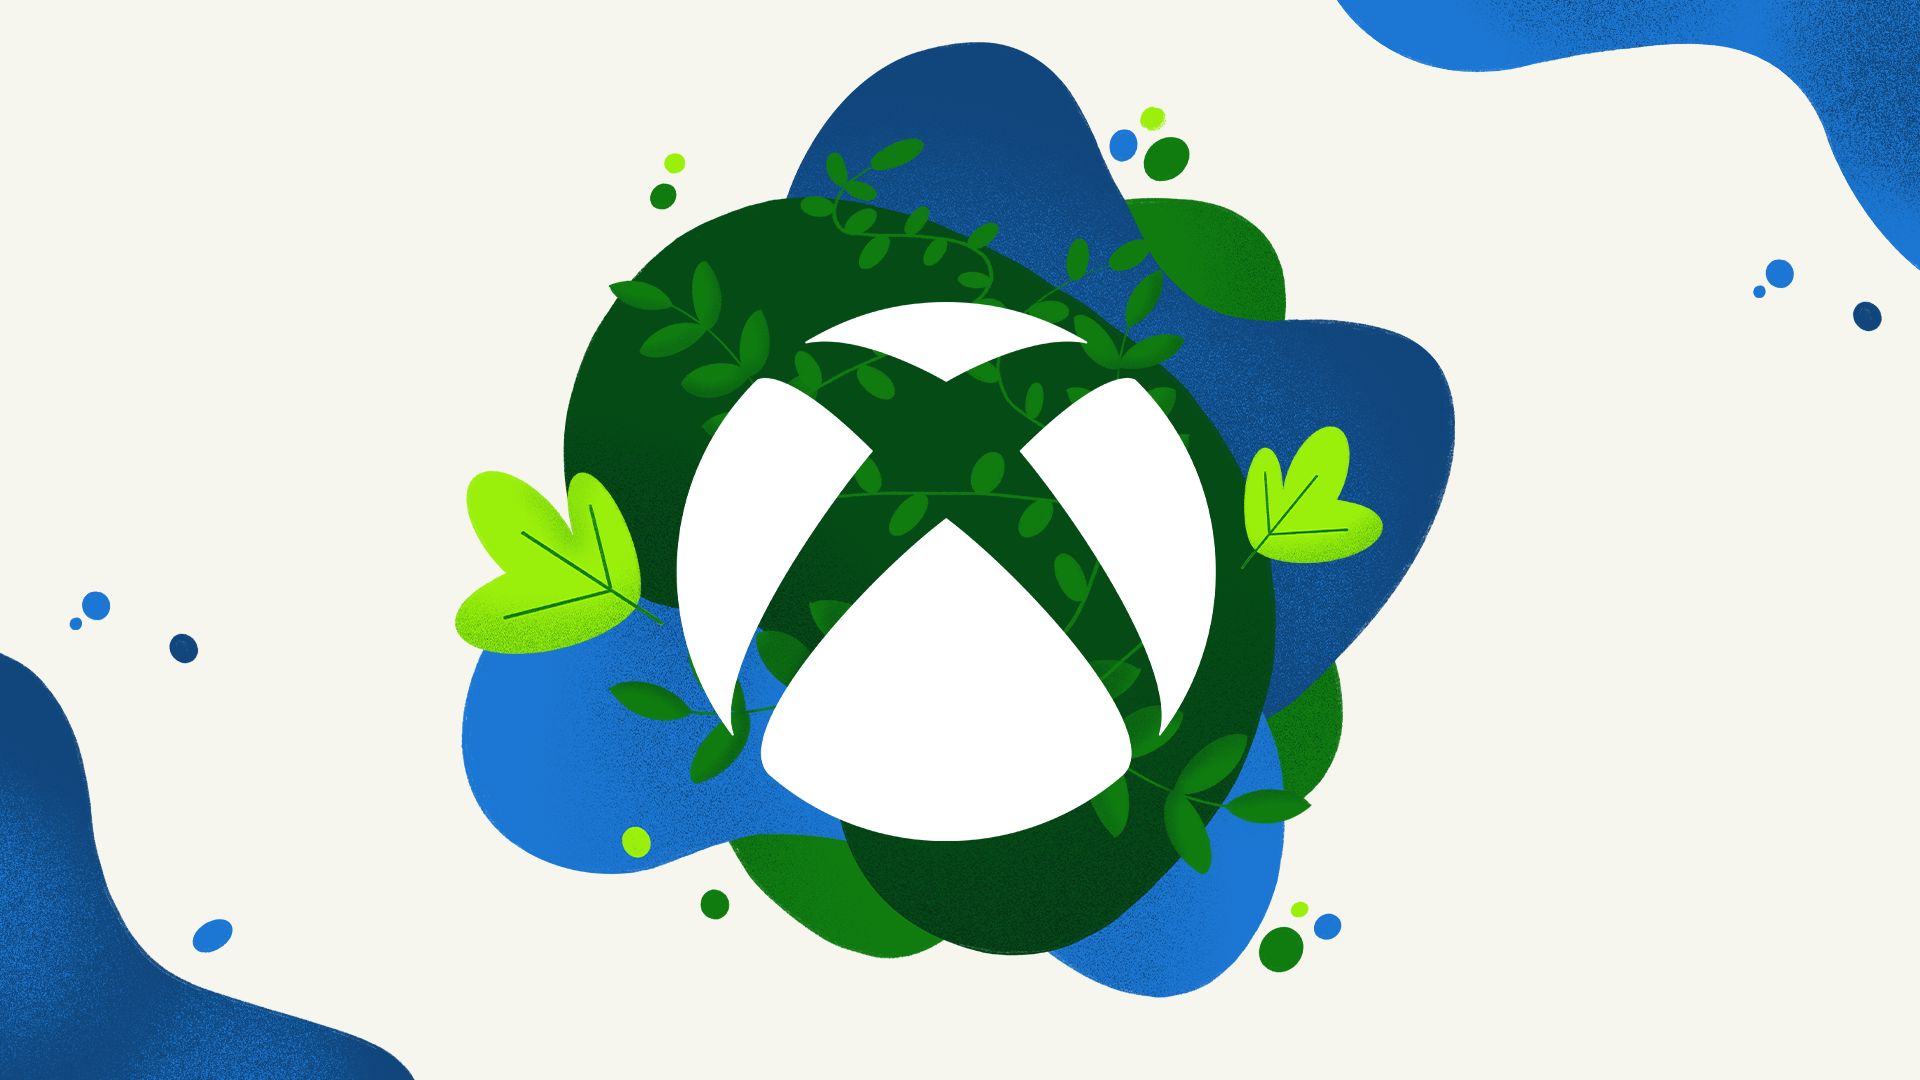 Team Xbox Celebrates Earth Day Hero Image with dark and light green and blue hues surrounding white nexus, with off white background.